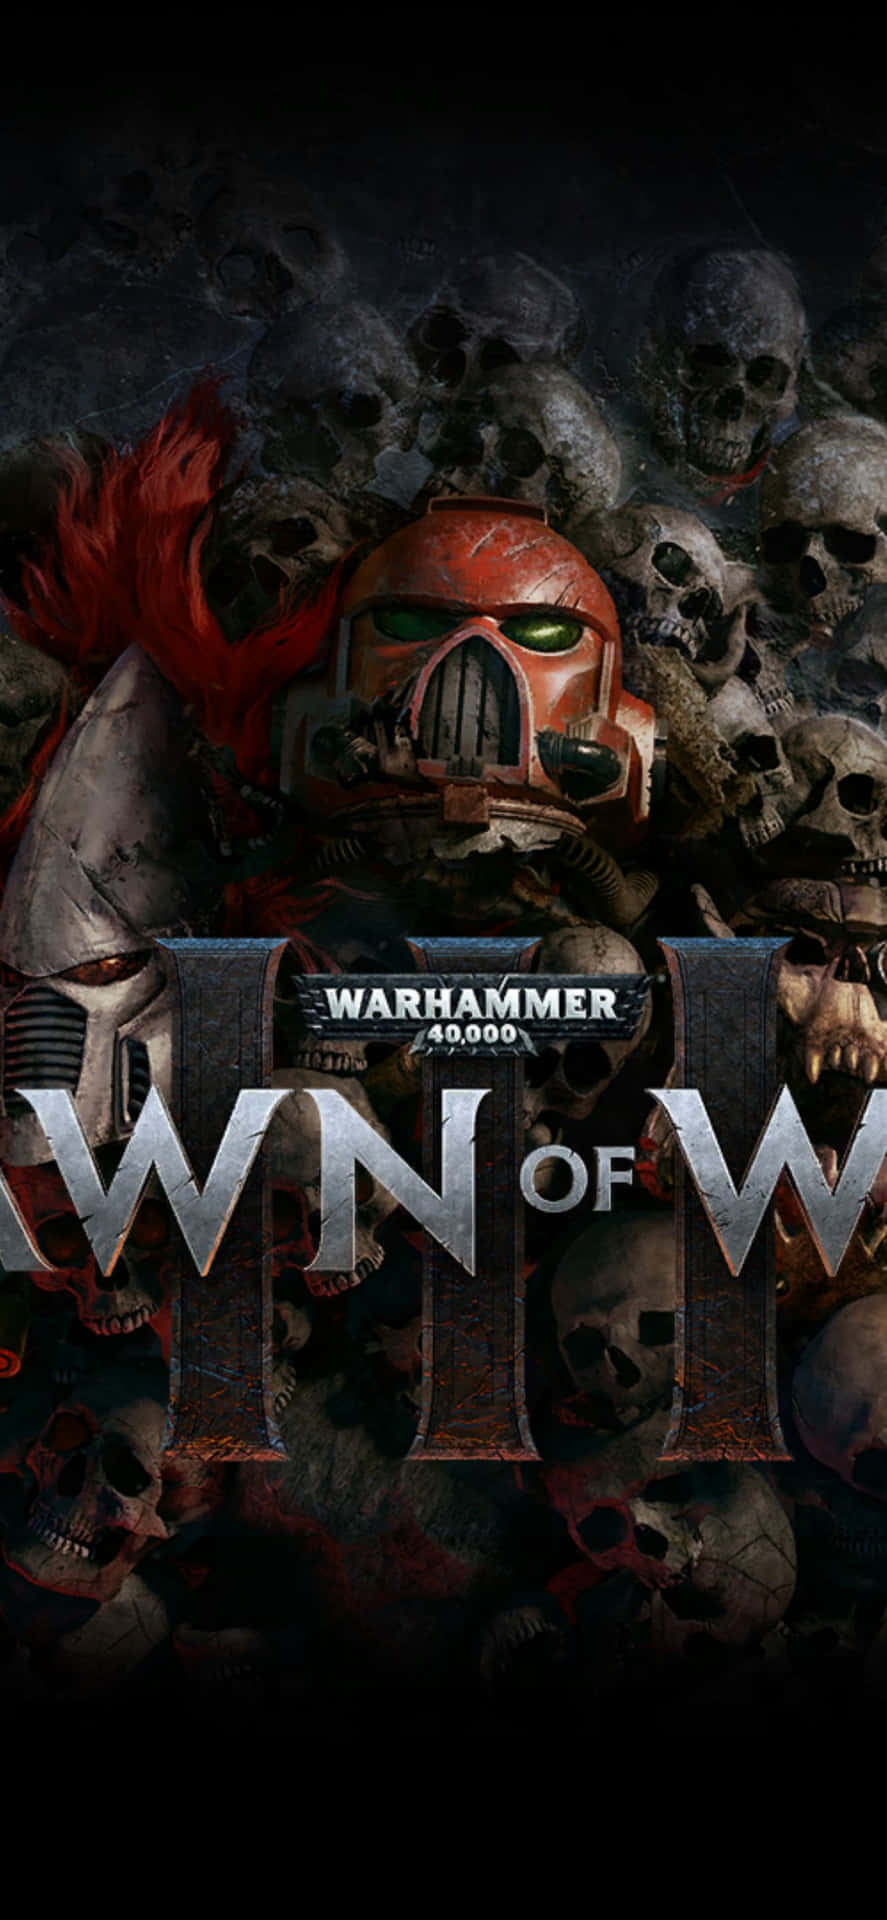 "A scene from the game Dawn of War III on an Iphone Xs"